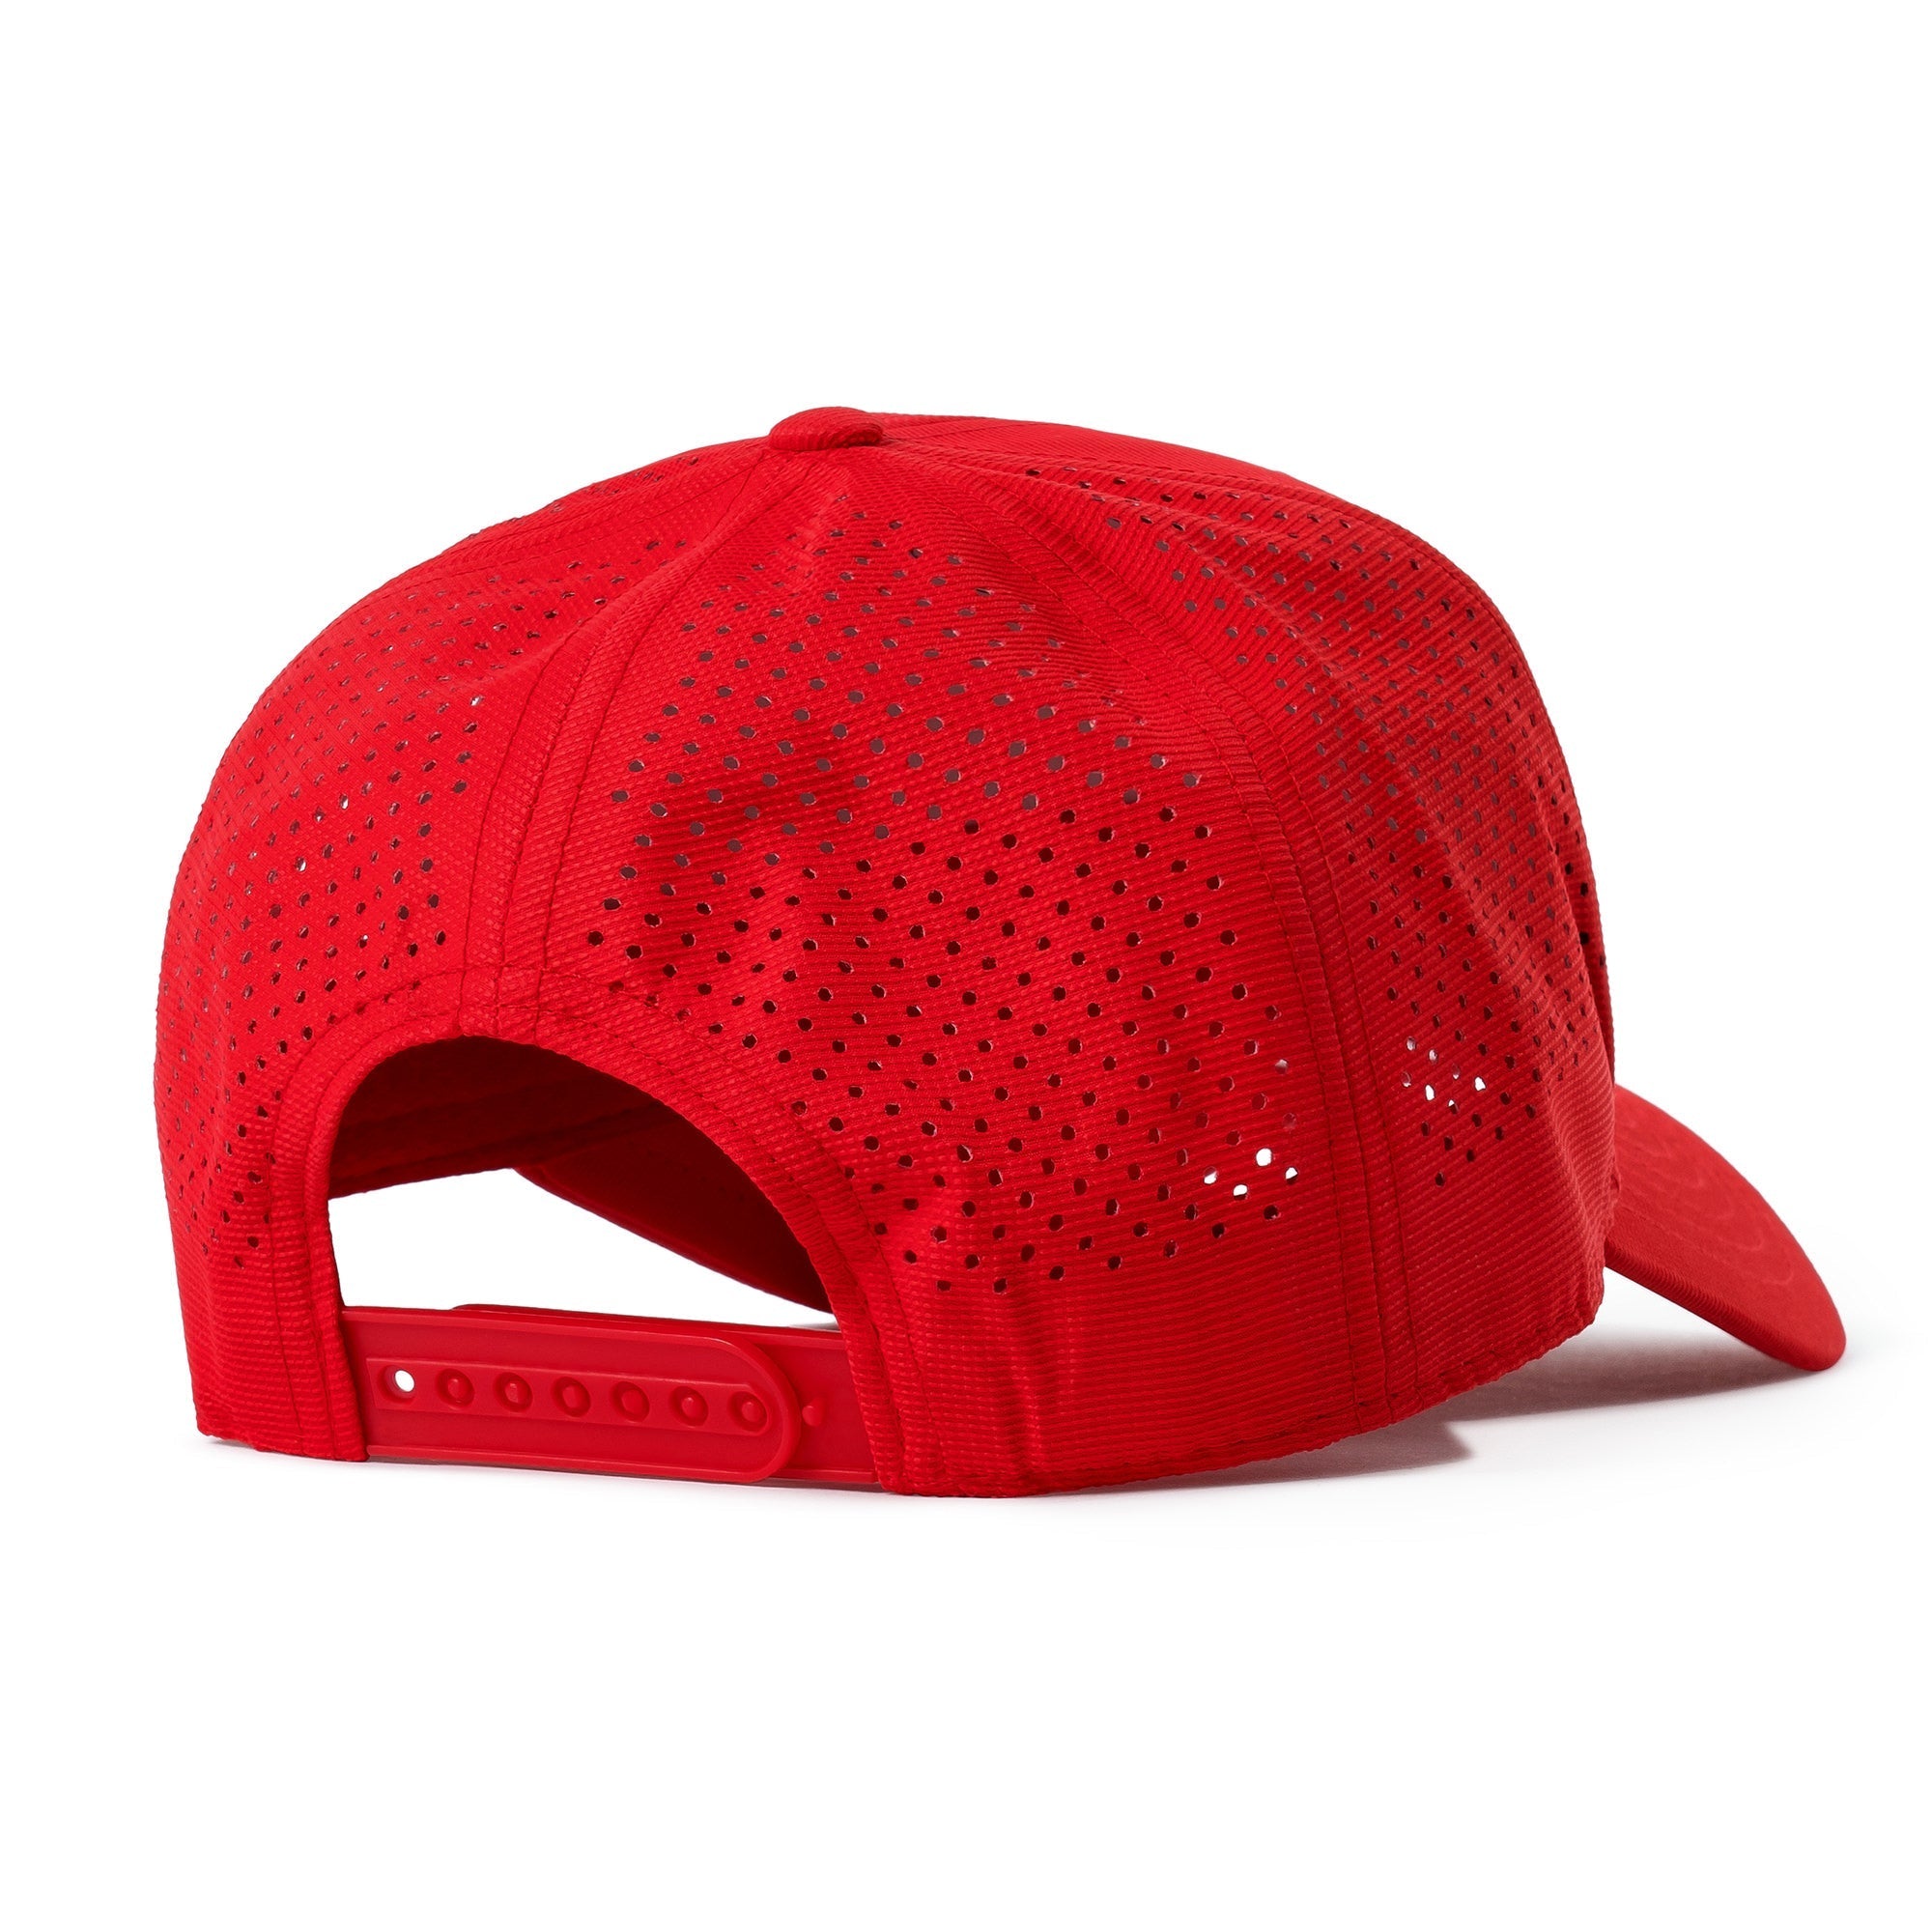 ActiveDry Snapback - Red - Rise